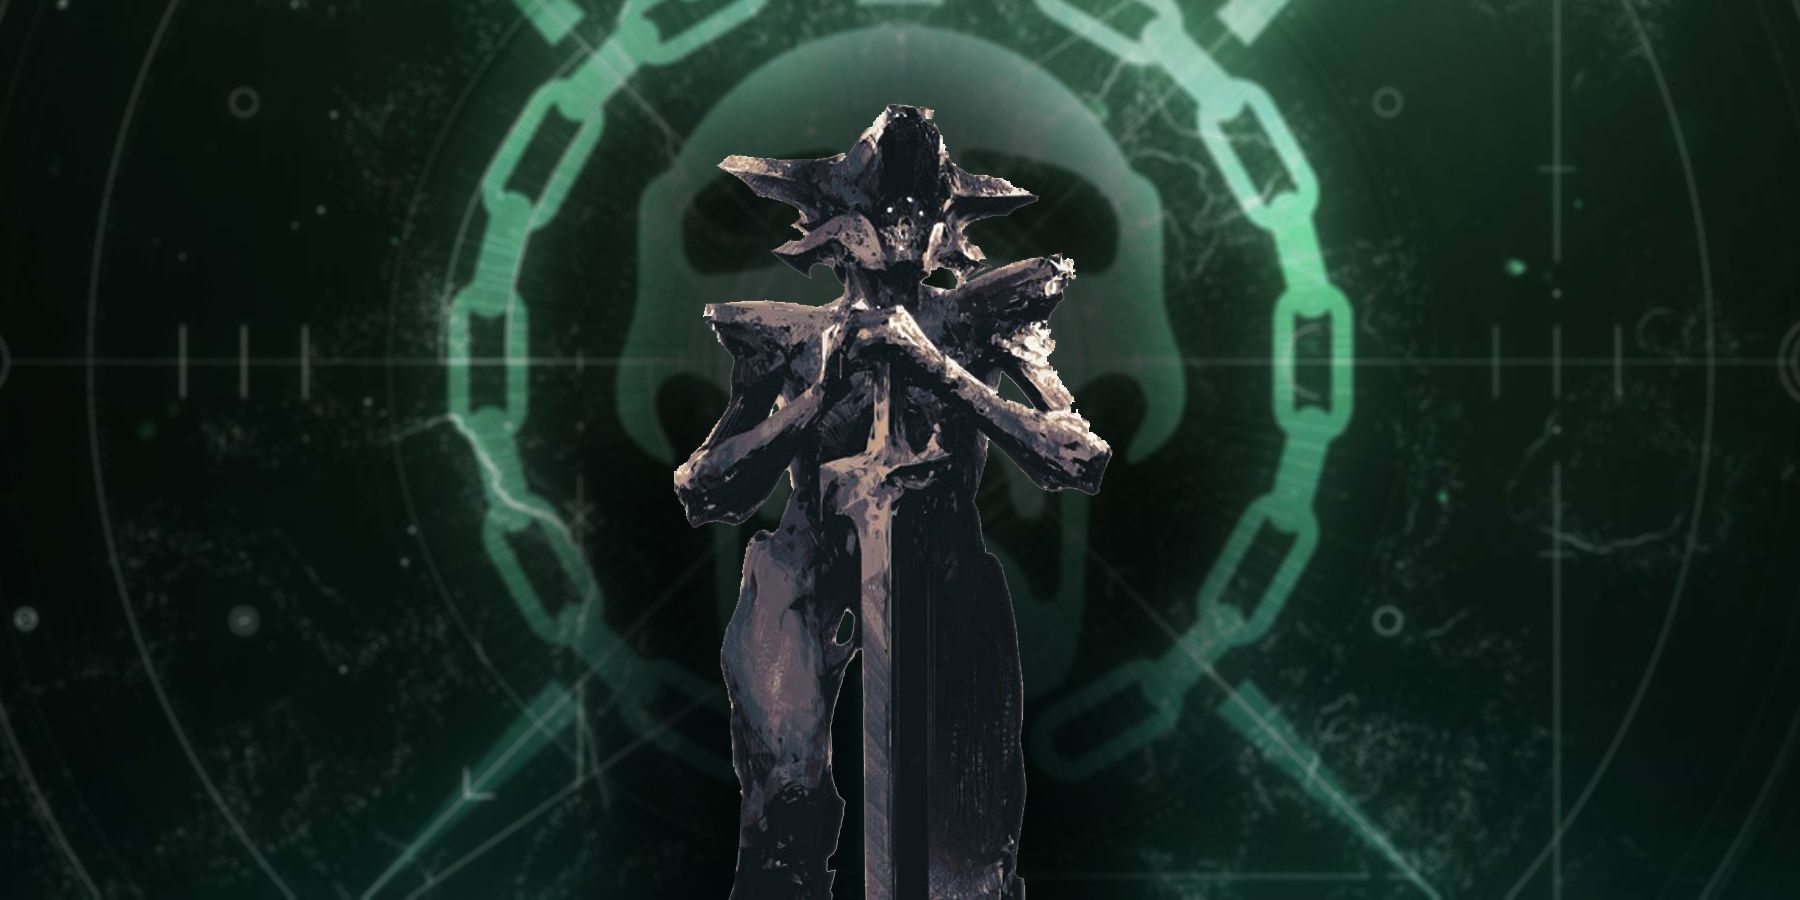 Destiny 2's Hive God of War, Xivu Arath, stands with her hand resting on the hilt of her Knight blade in front of a green raid symbol from the game.